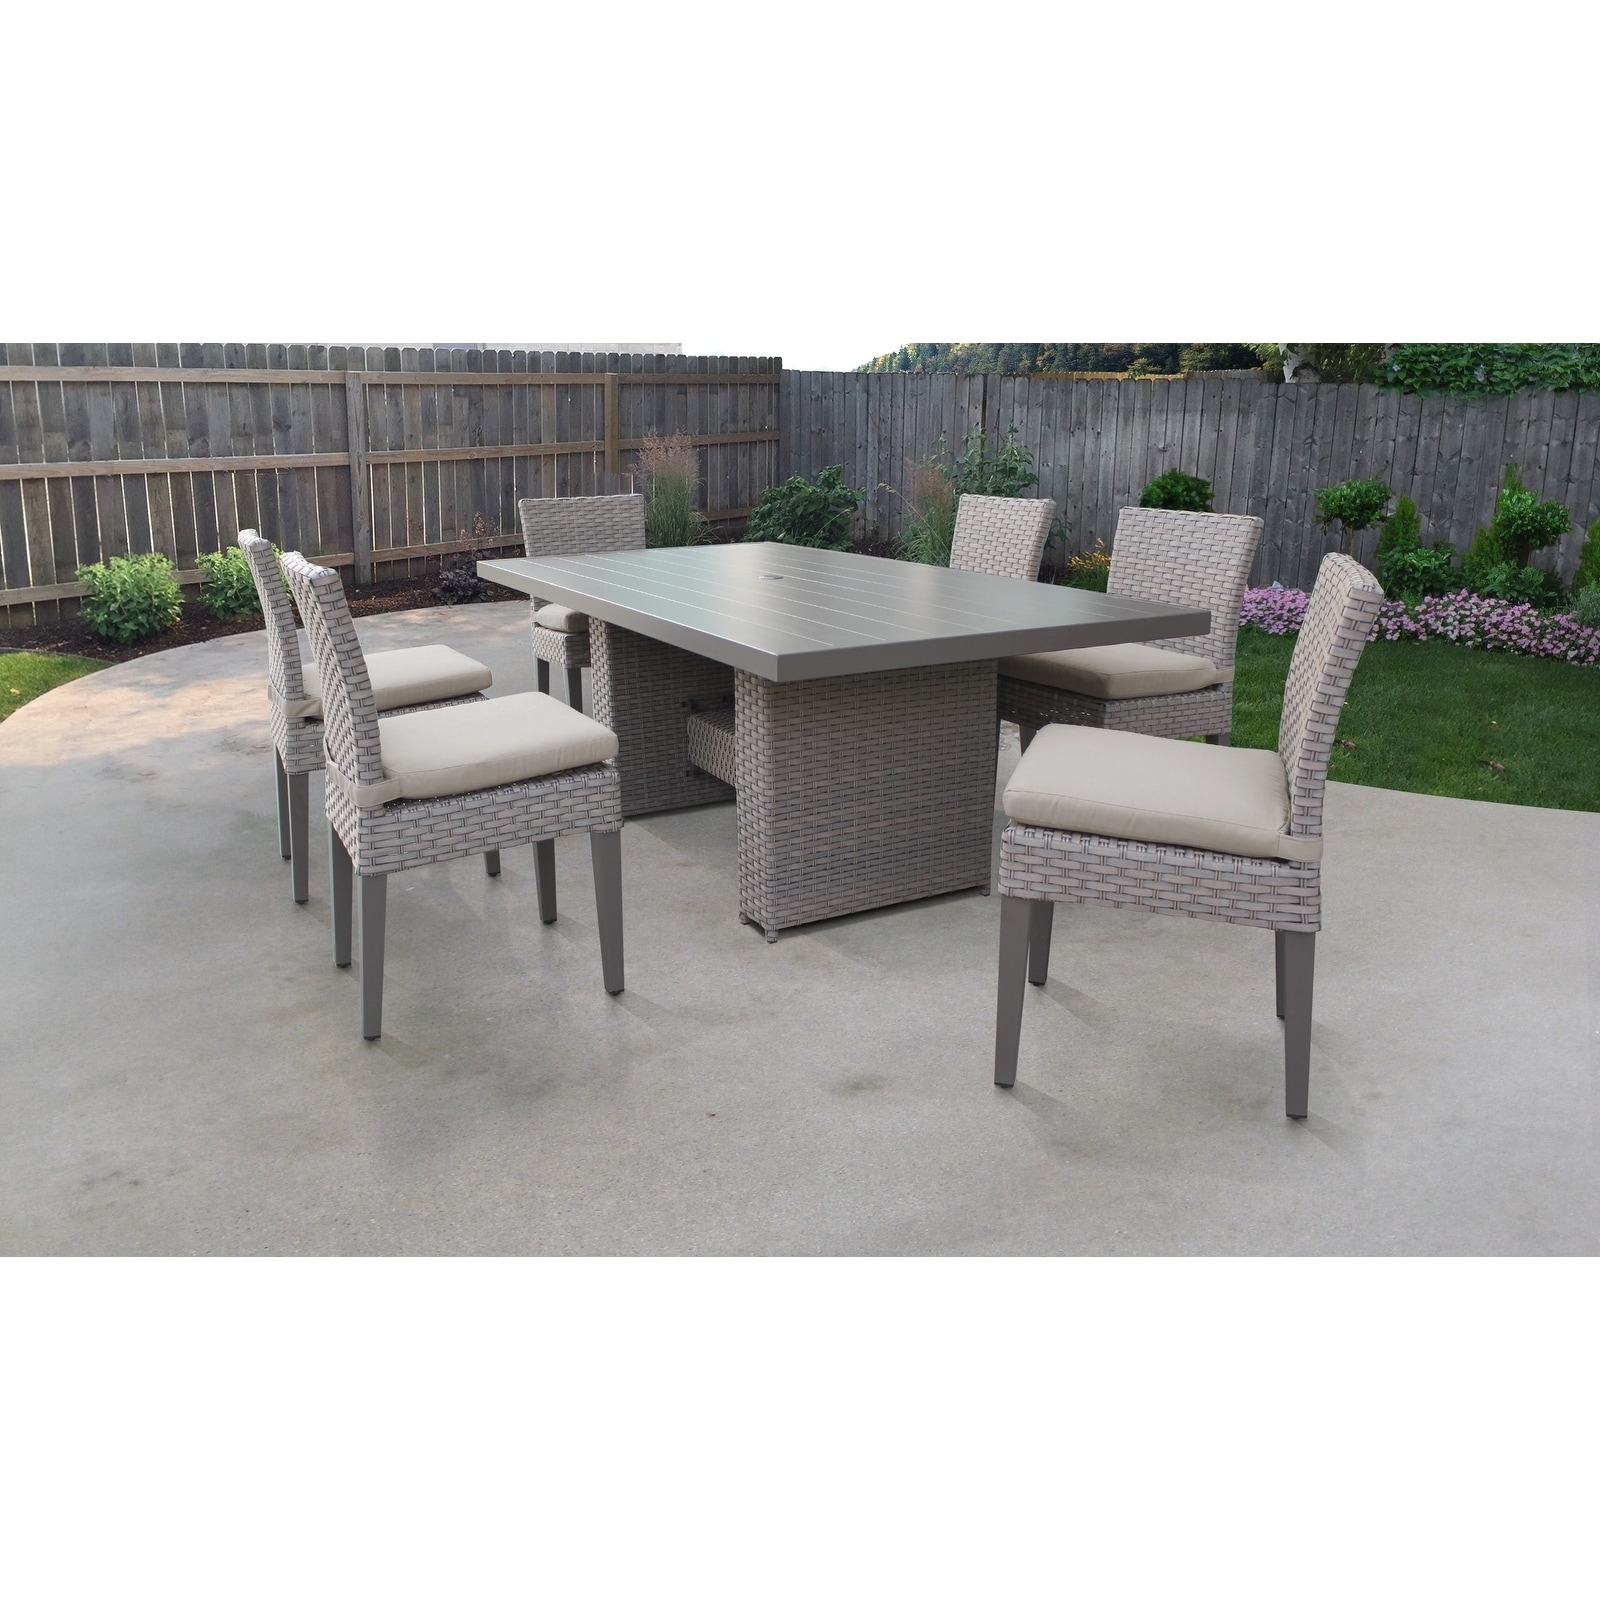 Monterey Rectangular Outdoor Patio Dining Table with 6 Armless Chairs